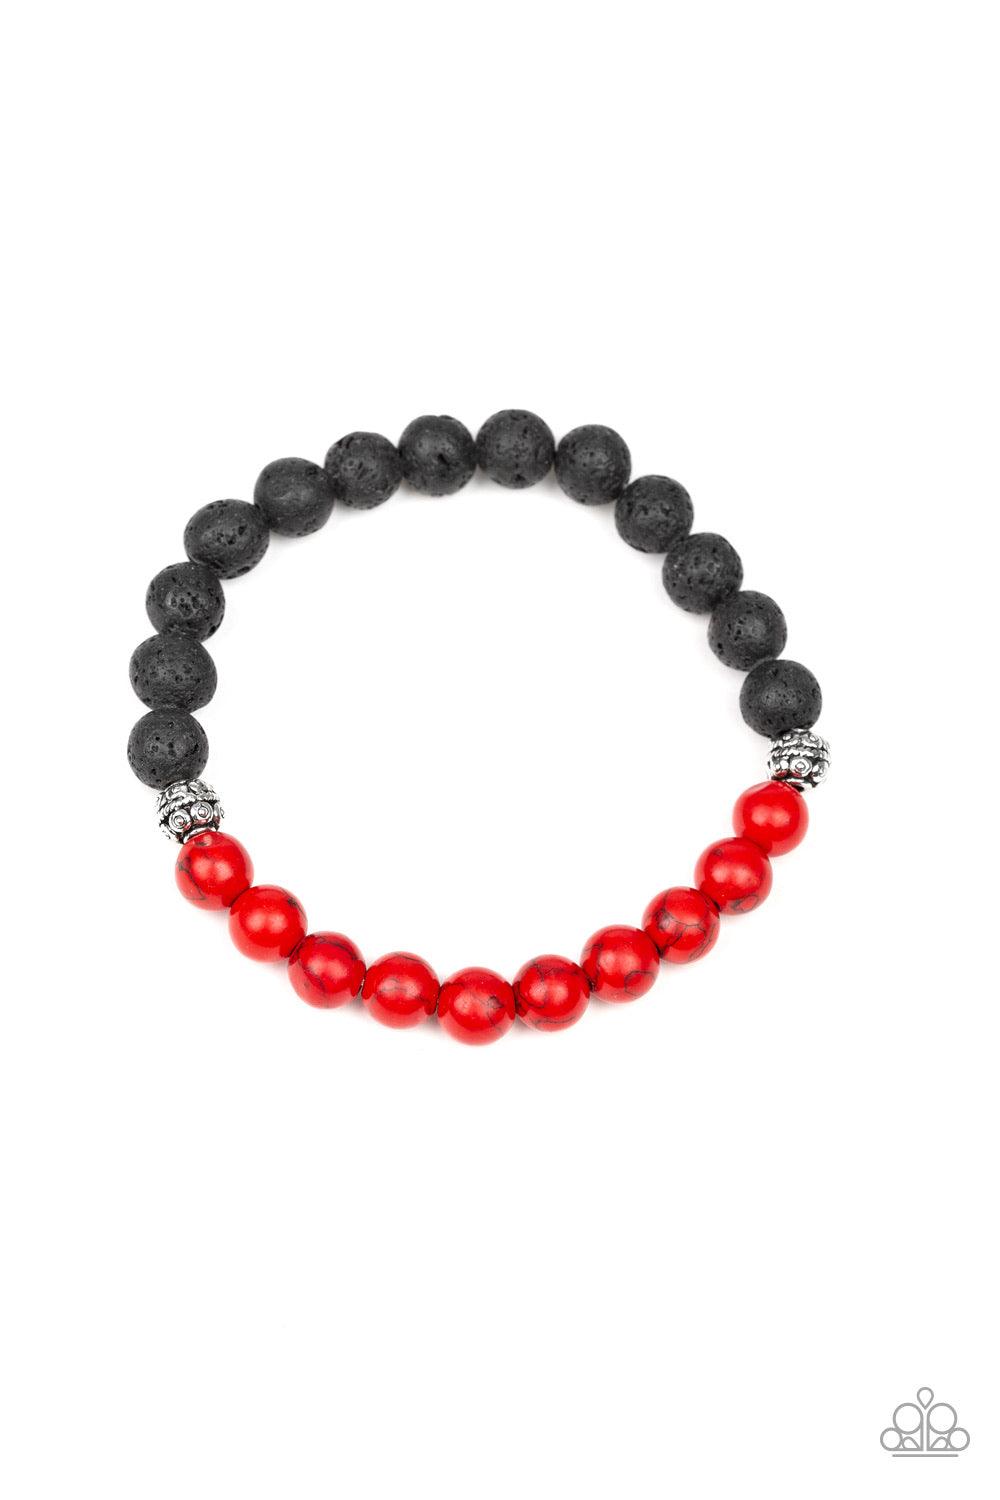 Paparazzi Accessories Fortune - Red Infused with dainty silver accents, a collection of black lava rock and fiery red stone beads are threaded along a stretchy band around the wrist for a seasonal style. Jewelry